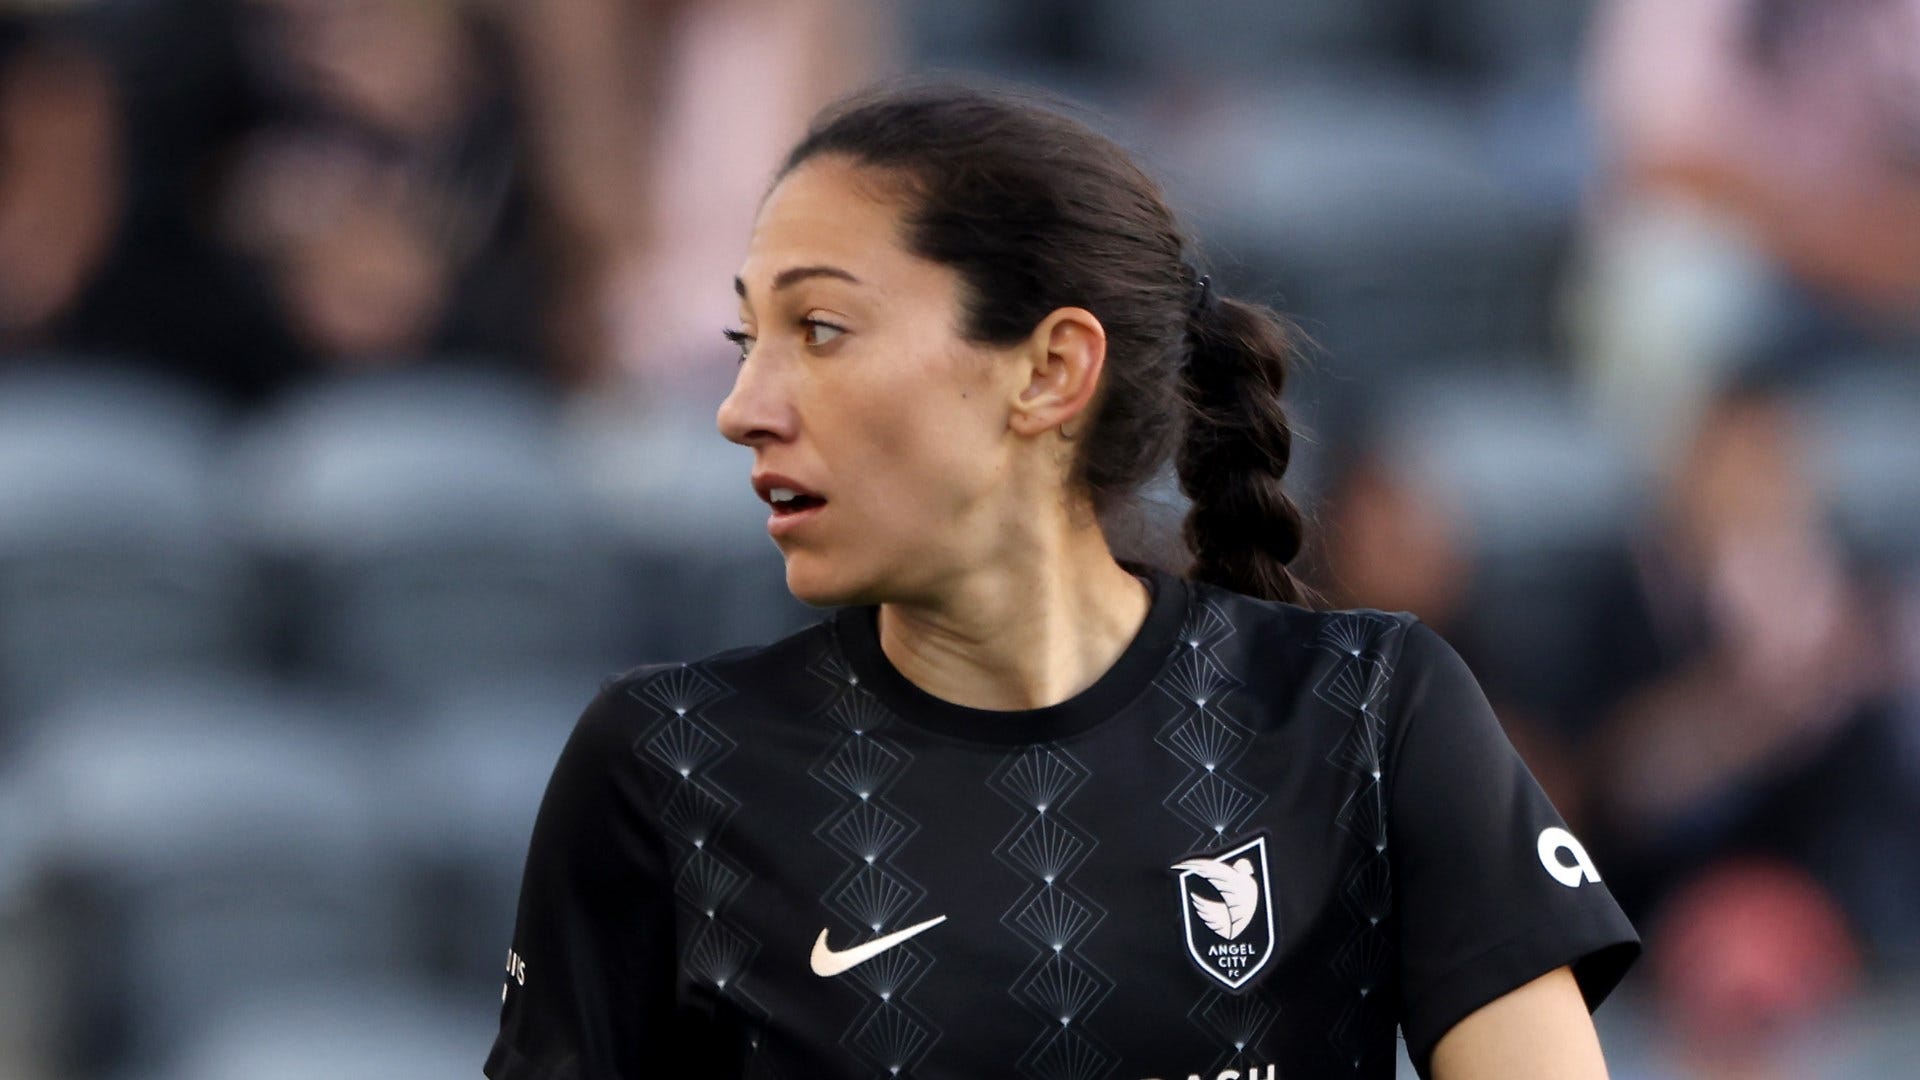 Christen Press: USWNT star signs with Angel City FC of the NWSL